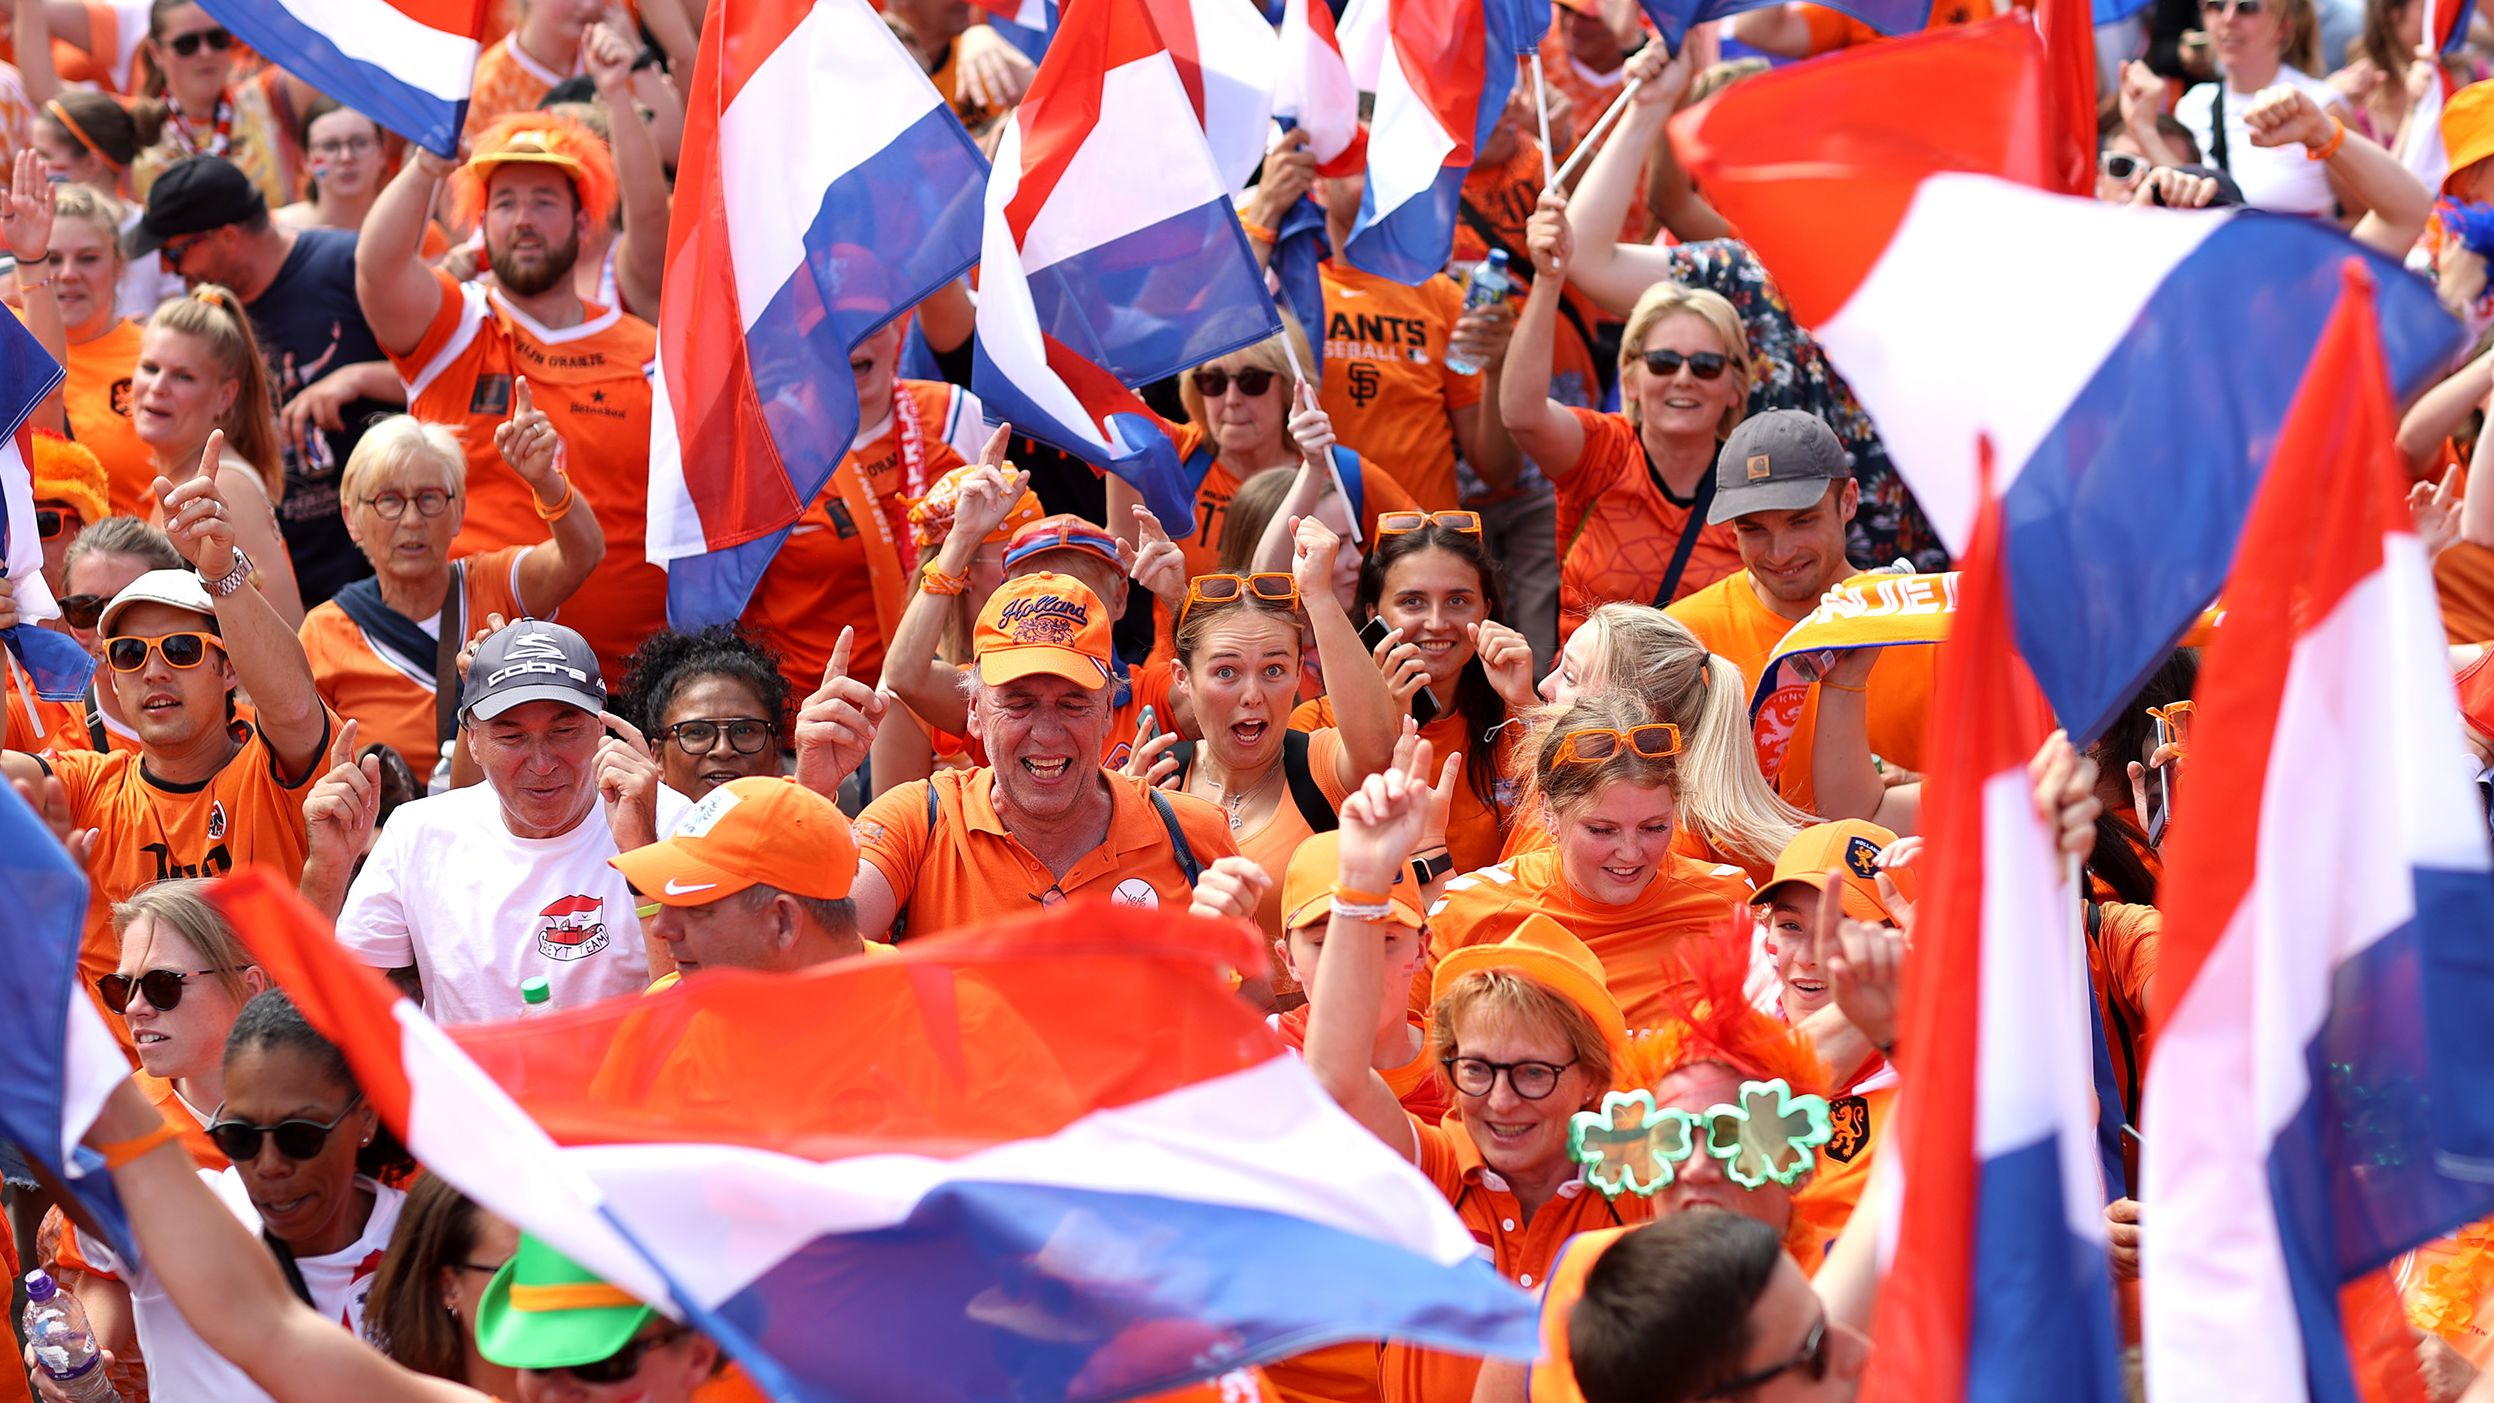 Netherlands fans show their support on the way to the stadium  for the team's game against Switzerland.